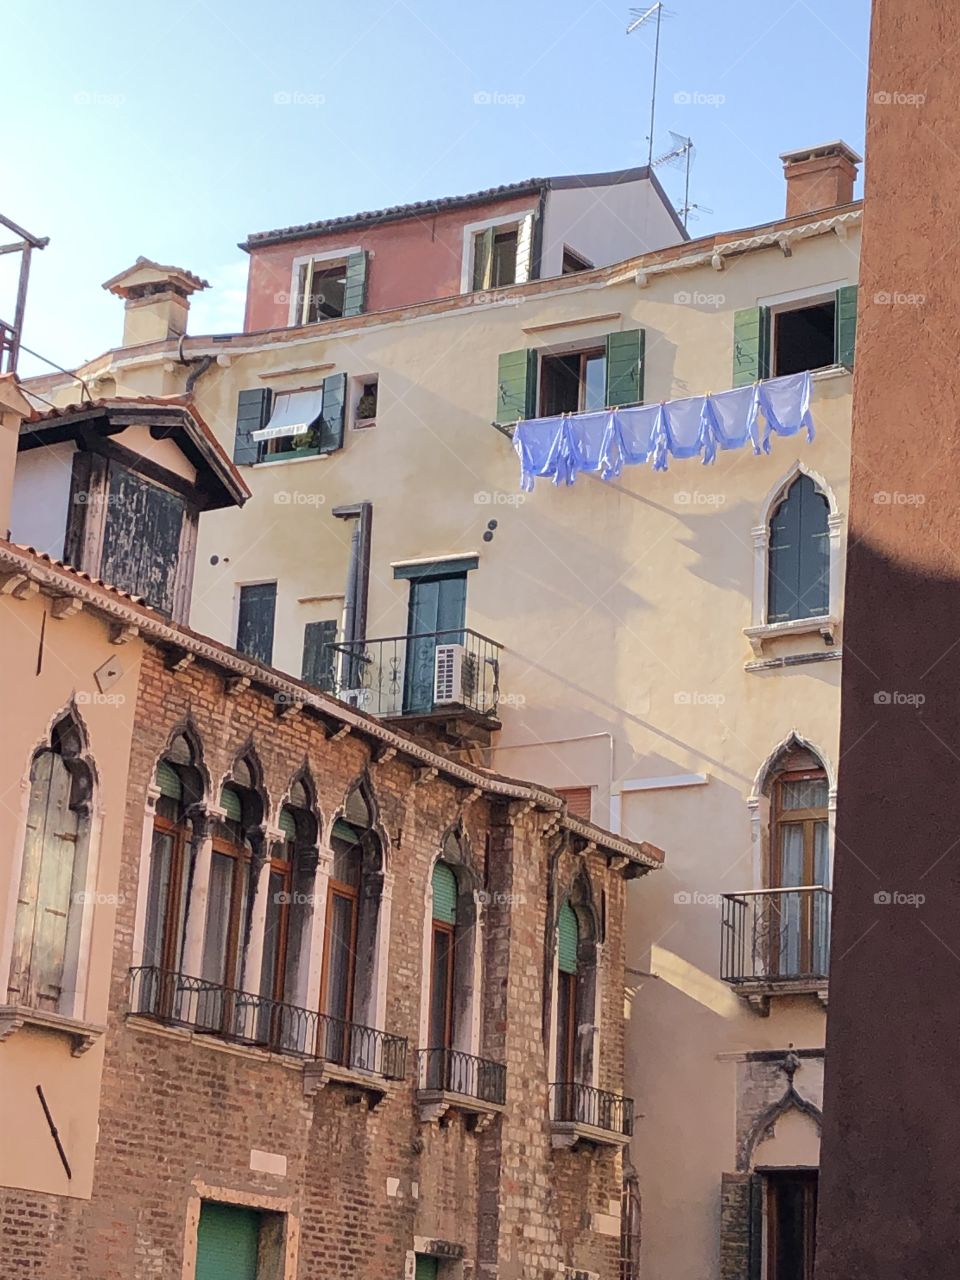 Blue shirts on drying in Venice